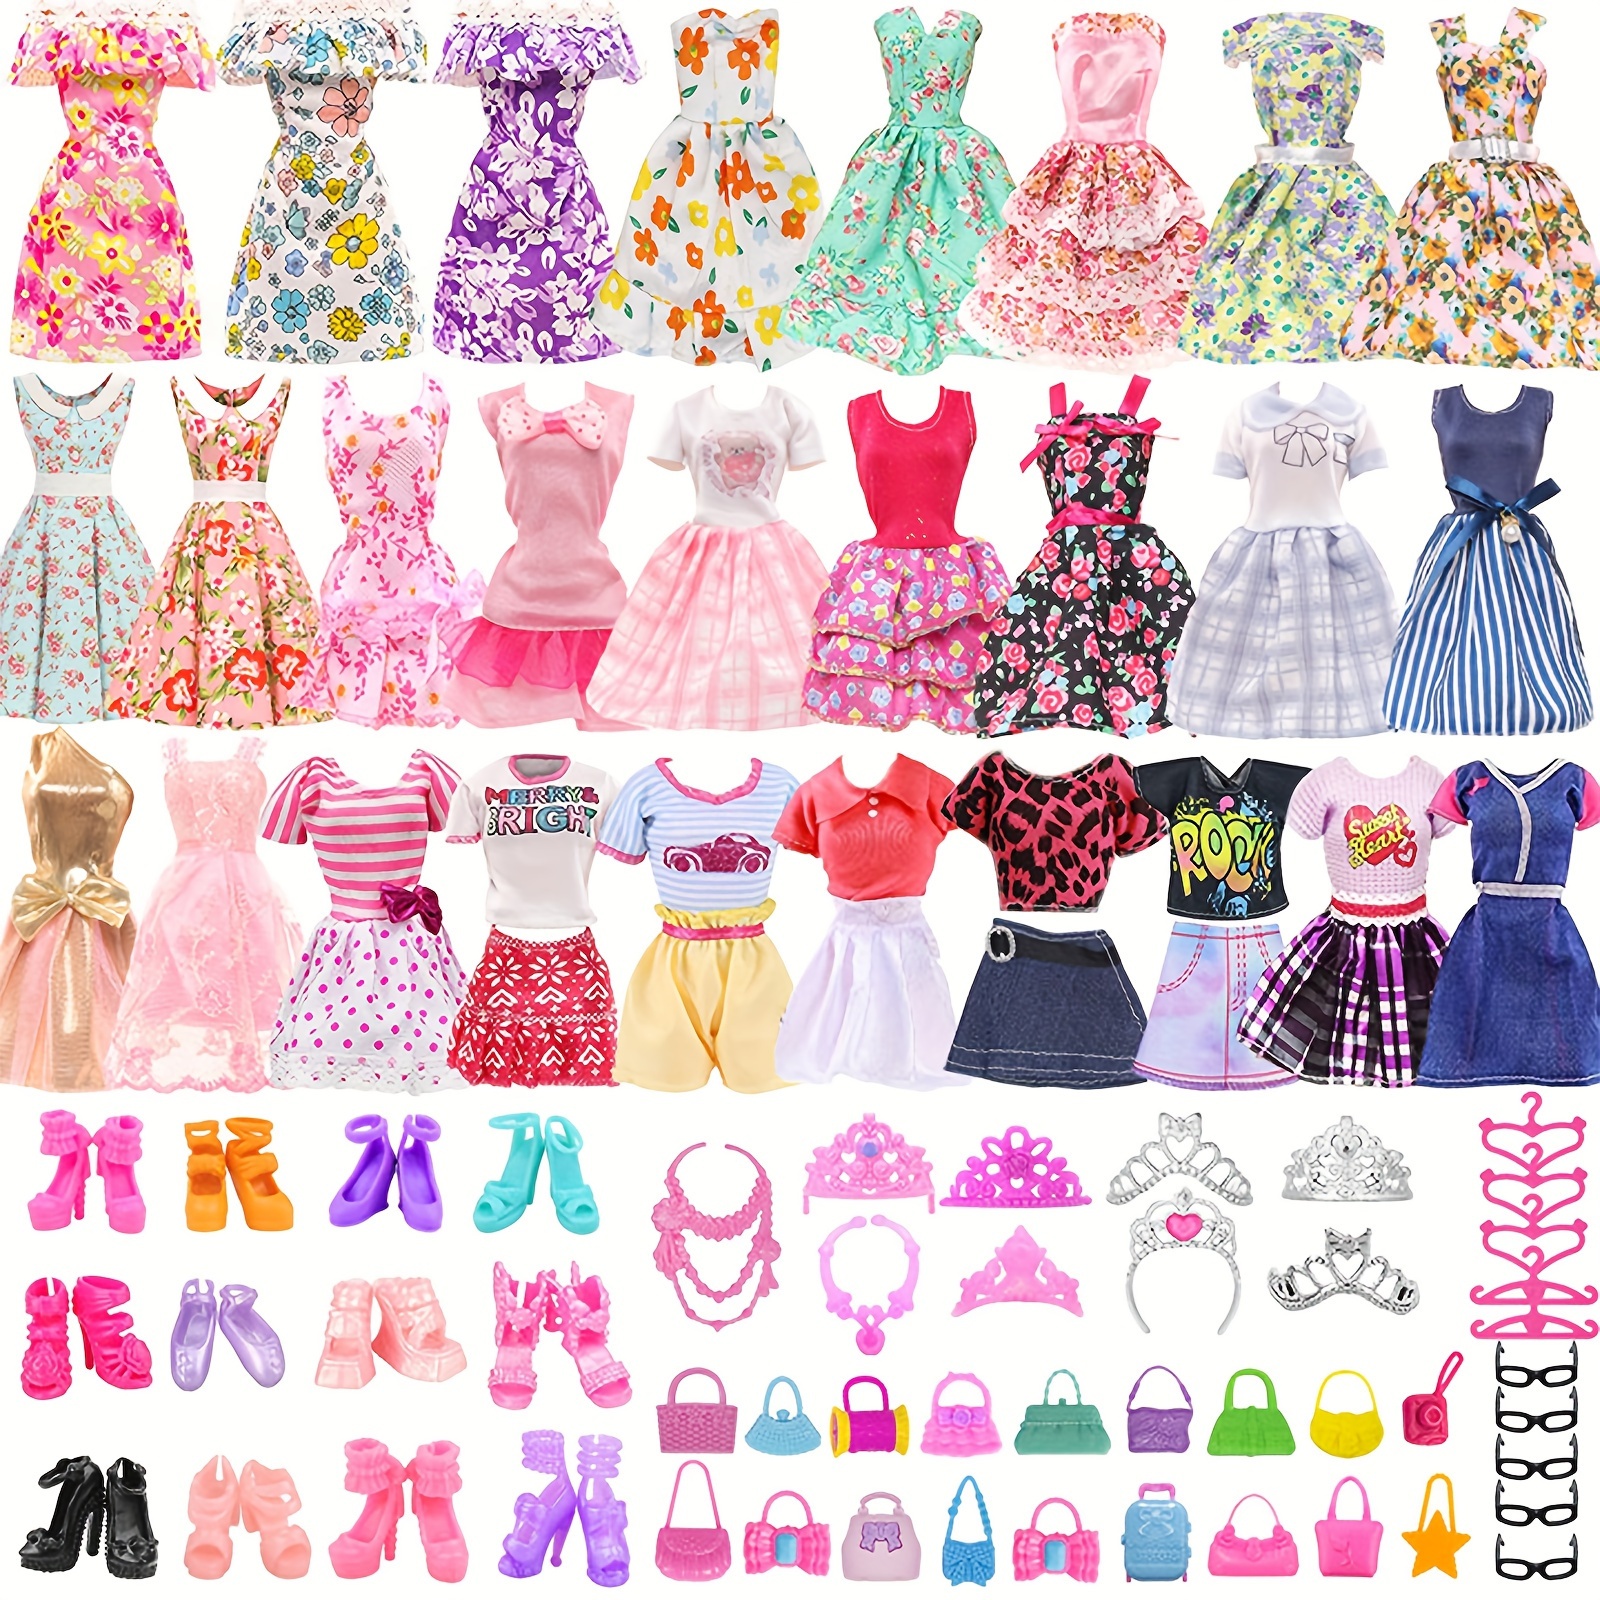 30 Pcs Doll Clothes and Accessories for Doll, 11.5 Inch Doll Outfit  Collection Including 1 Set 9 Tops 9 Pants 10 Pairs Shoes(Random Style), for  Girls